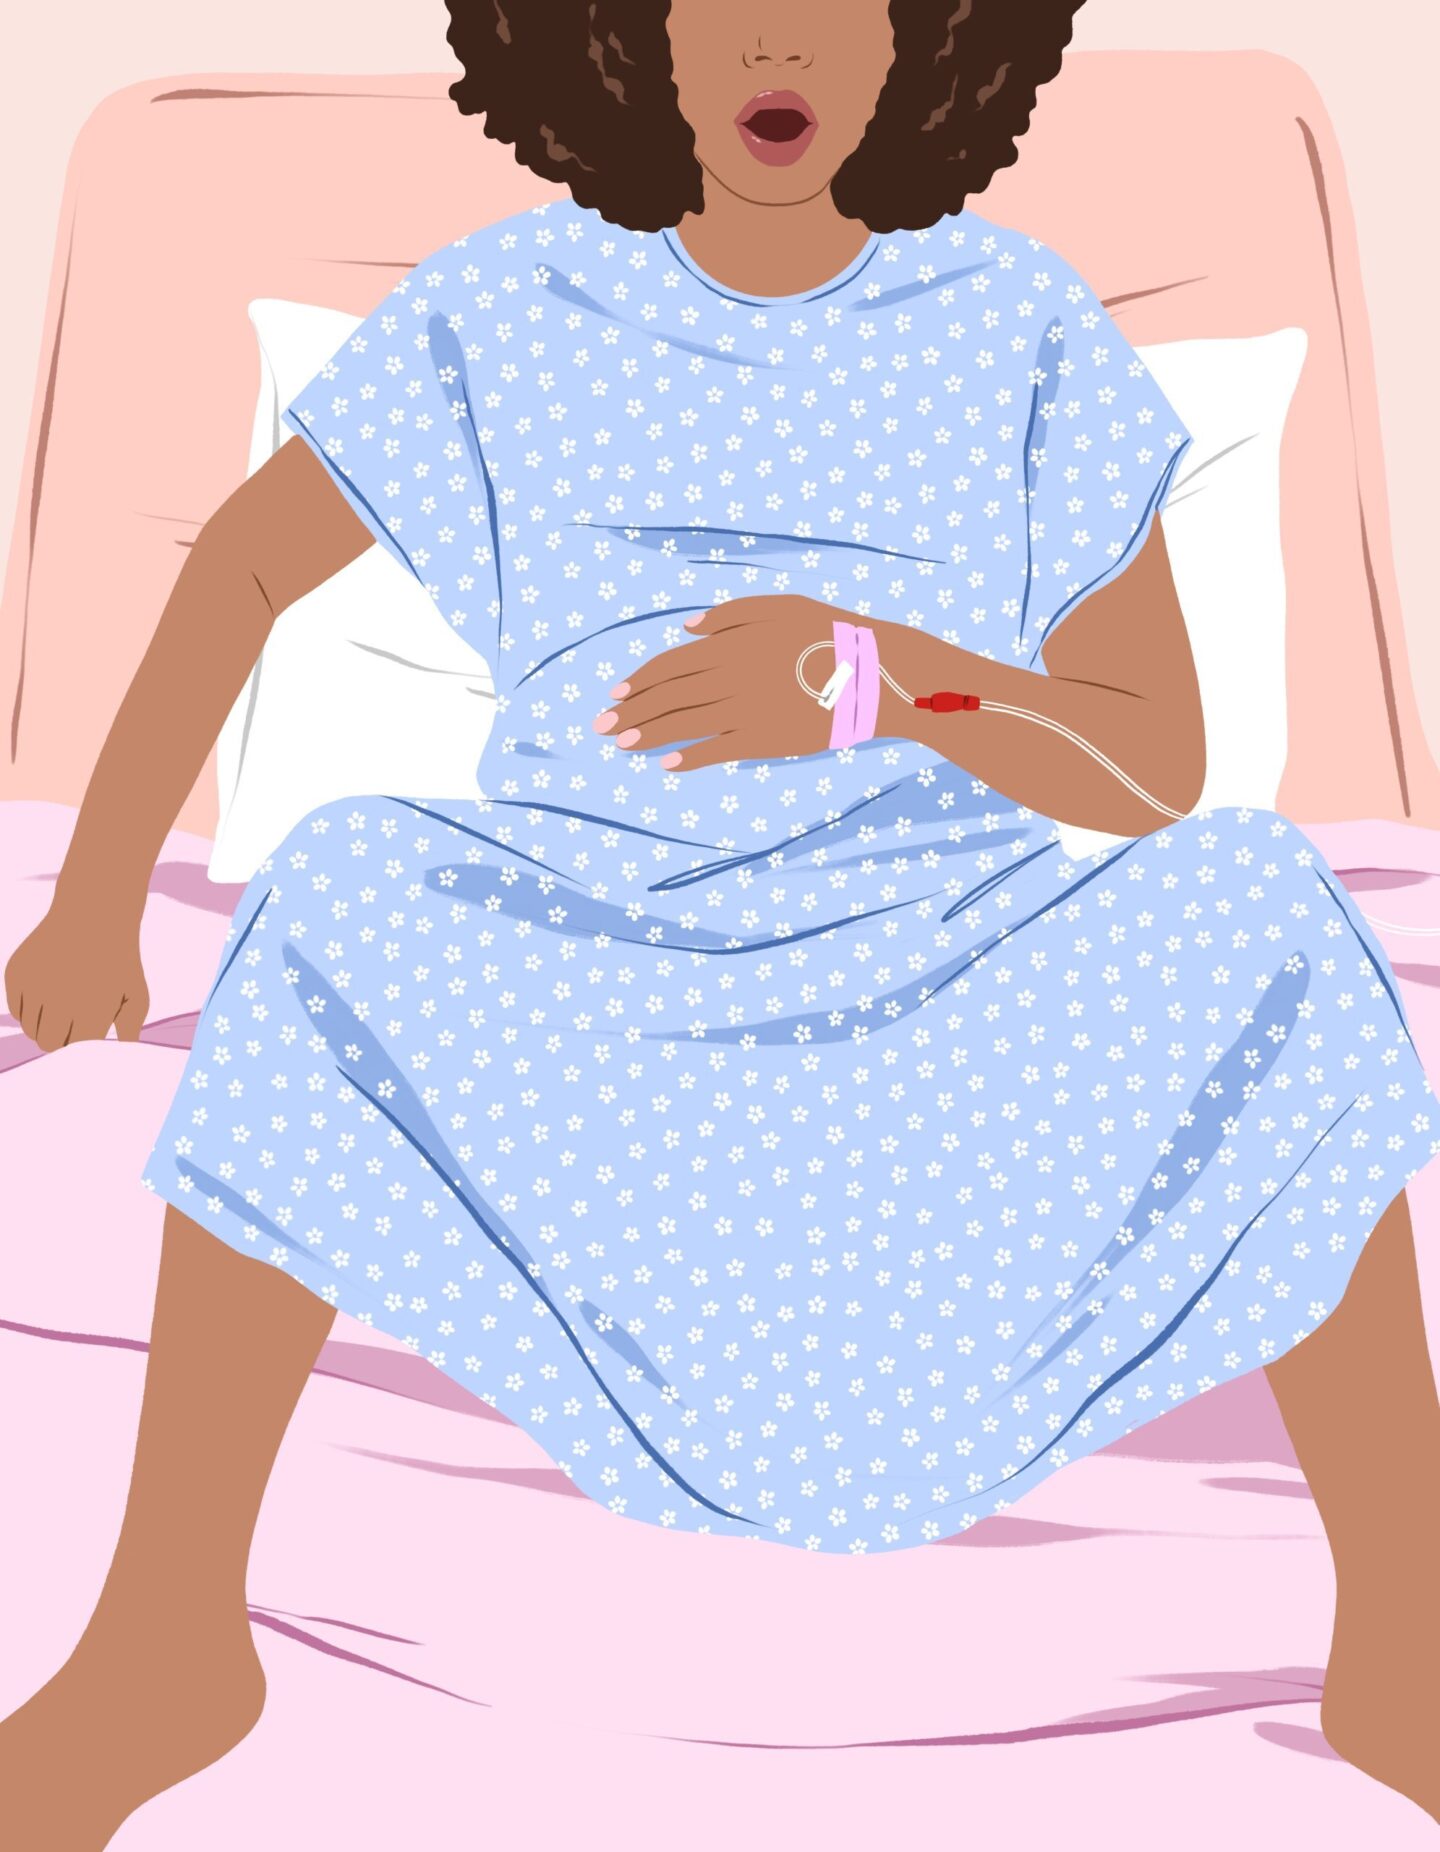 illustration of woman in labor